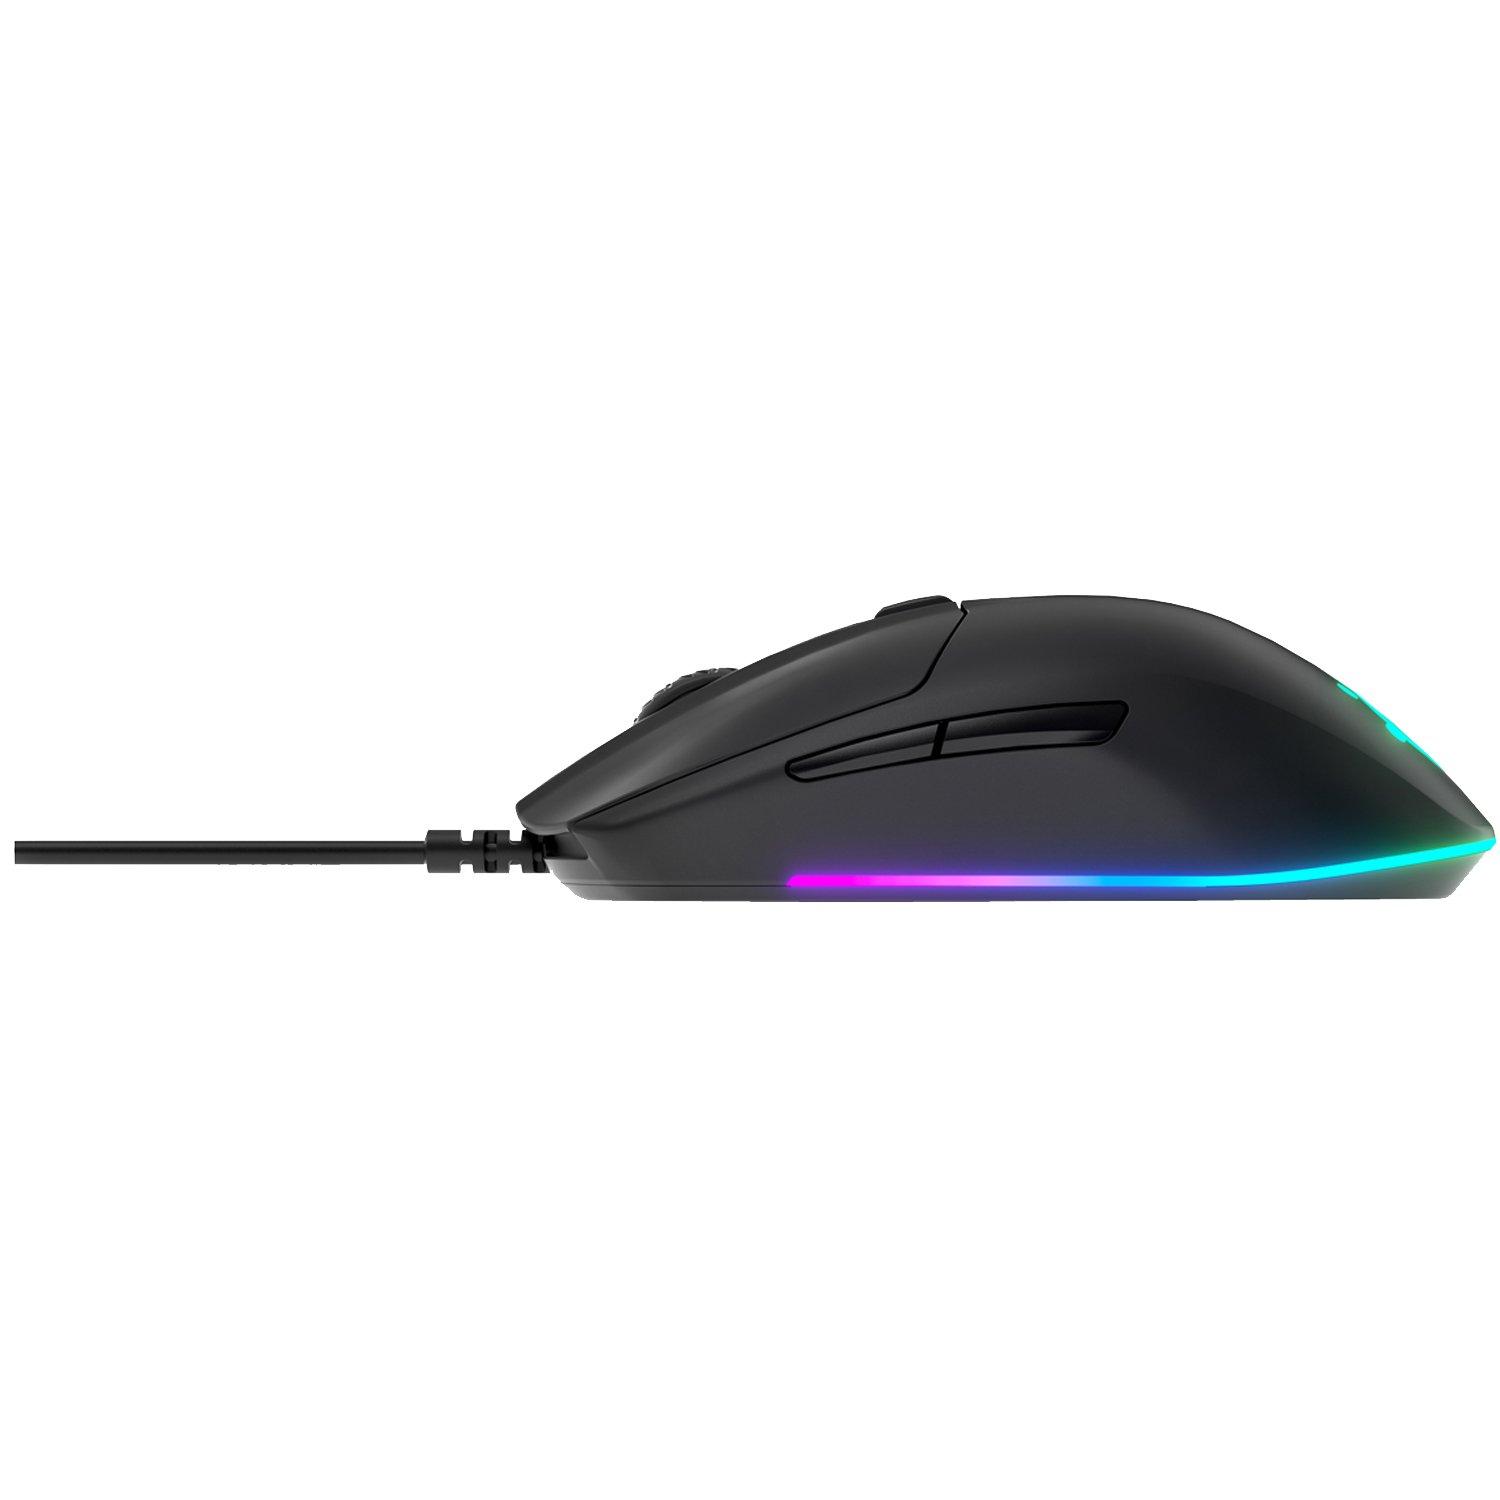 Mouse Gaming 3 | RGB Steelseries Optical GameStop Rival Wired